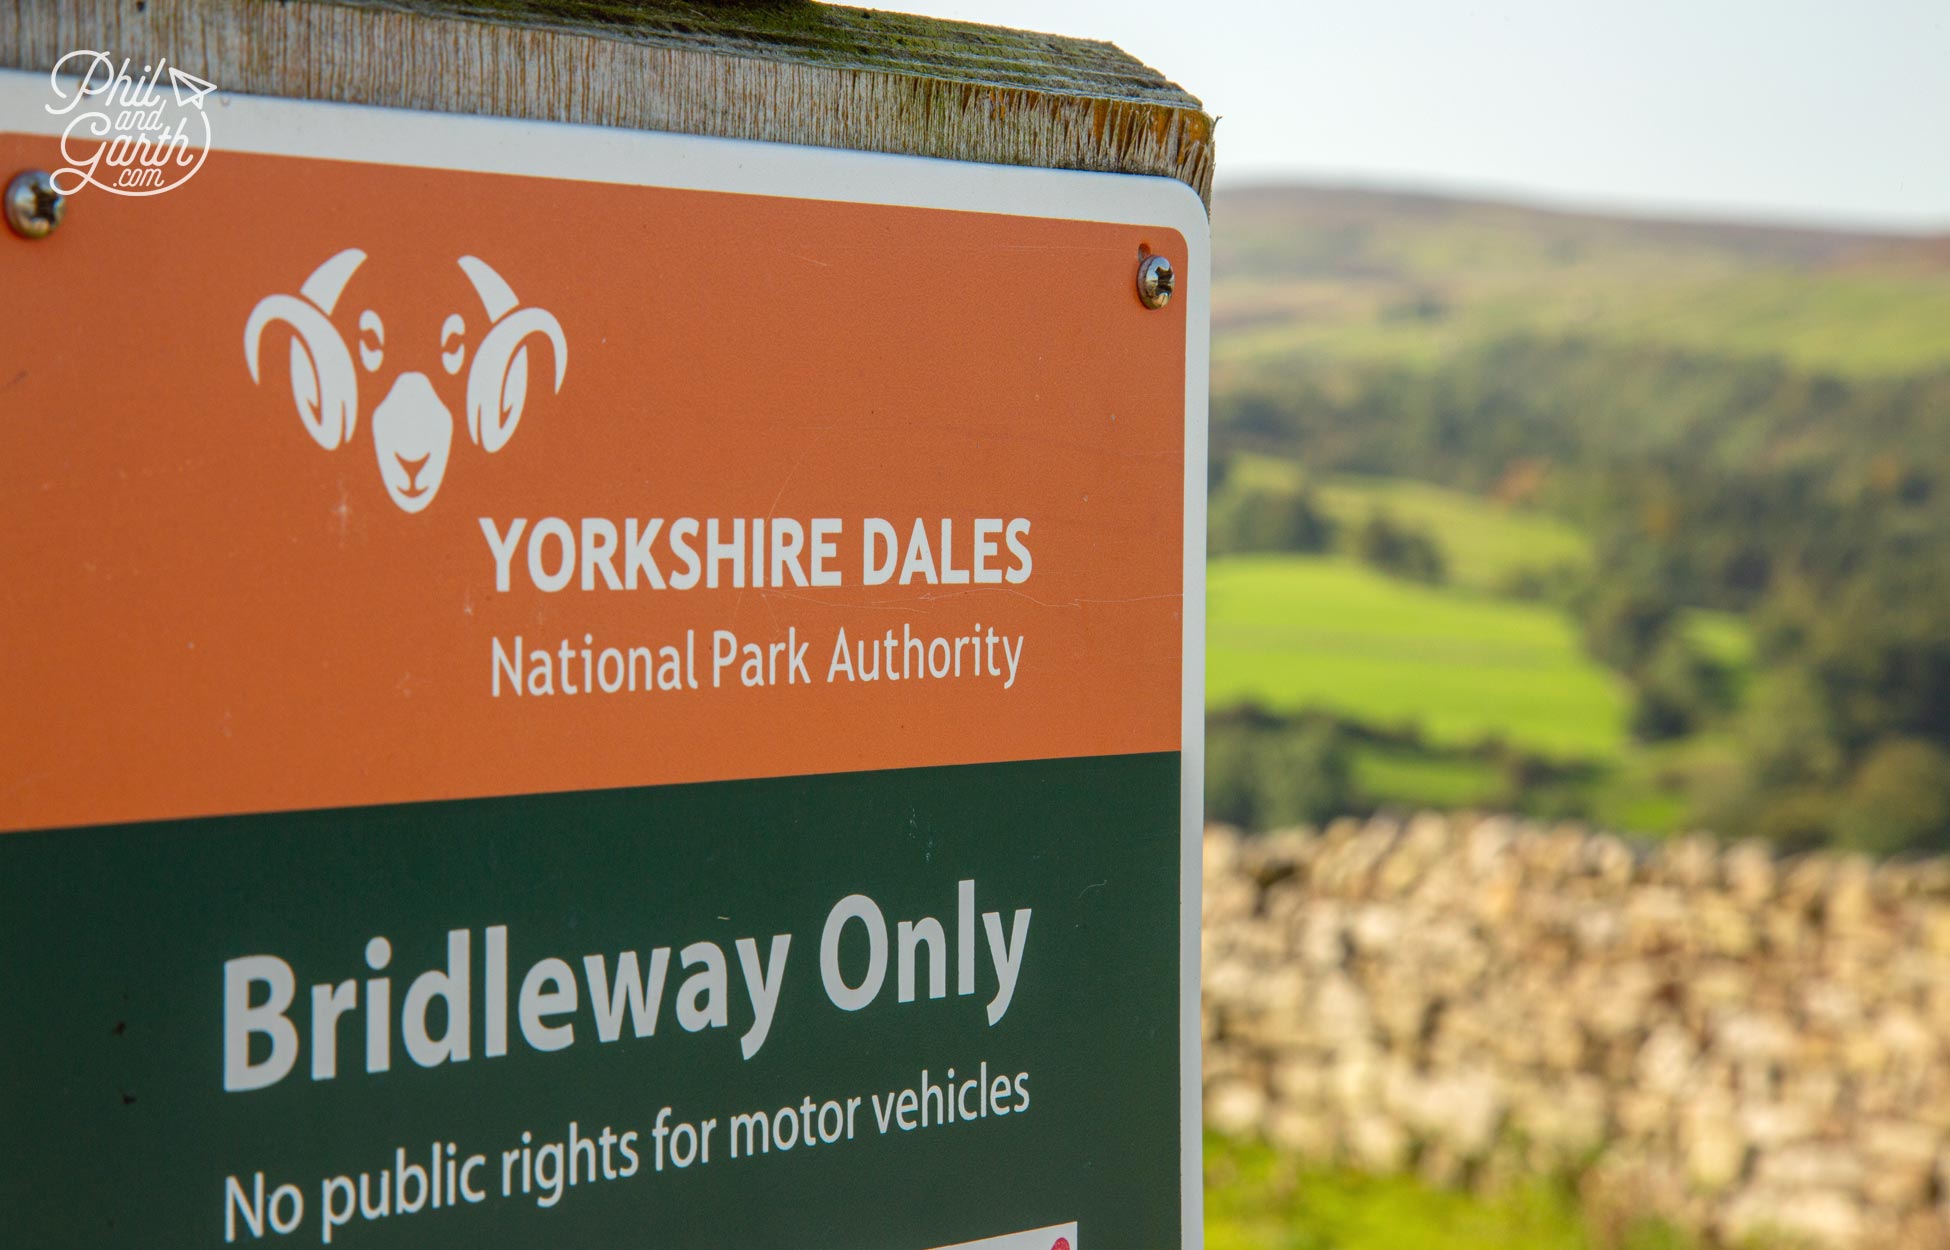 Swaledale sheep feature as the symbol of The Yorkshire Dales National Park